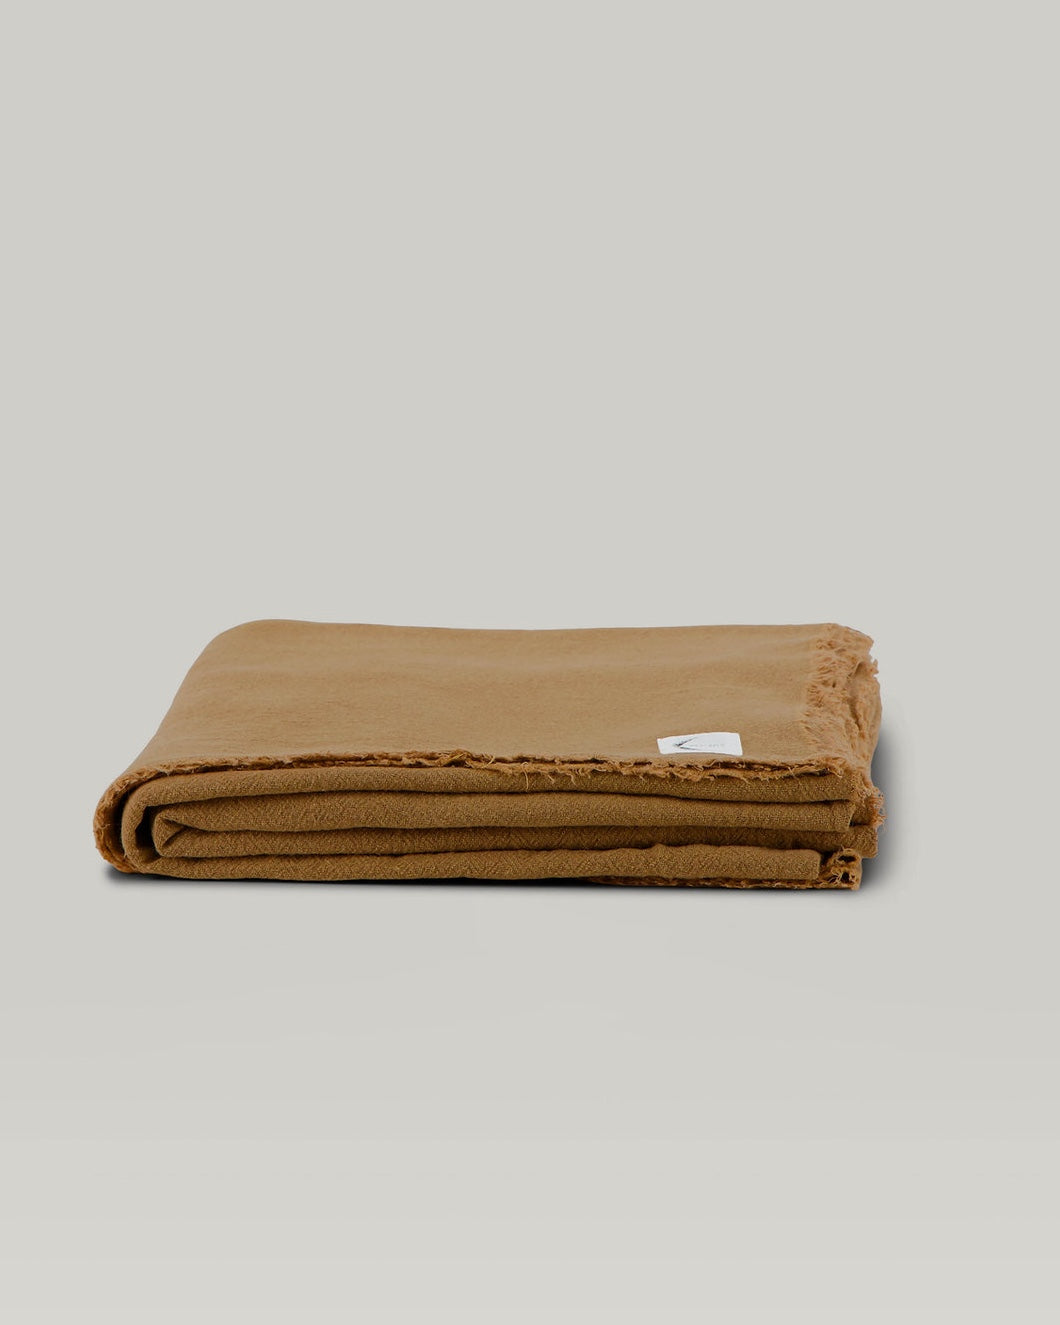 Tablecloth / Plaid / Bedspread in raw linen, Tobacco 